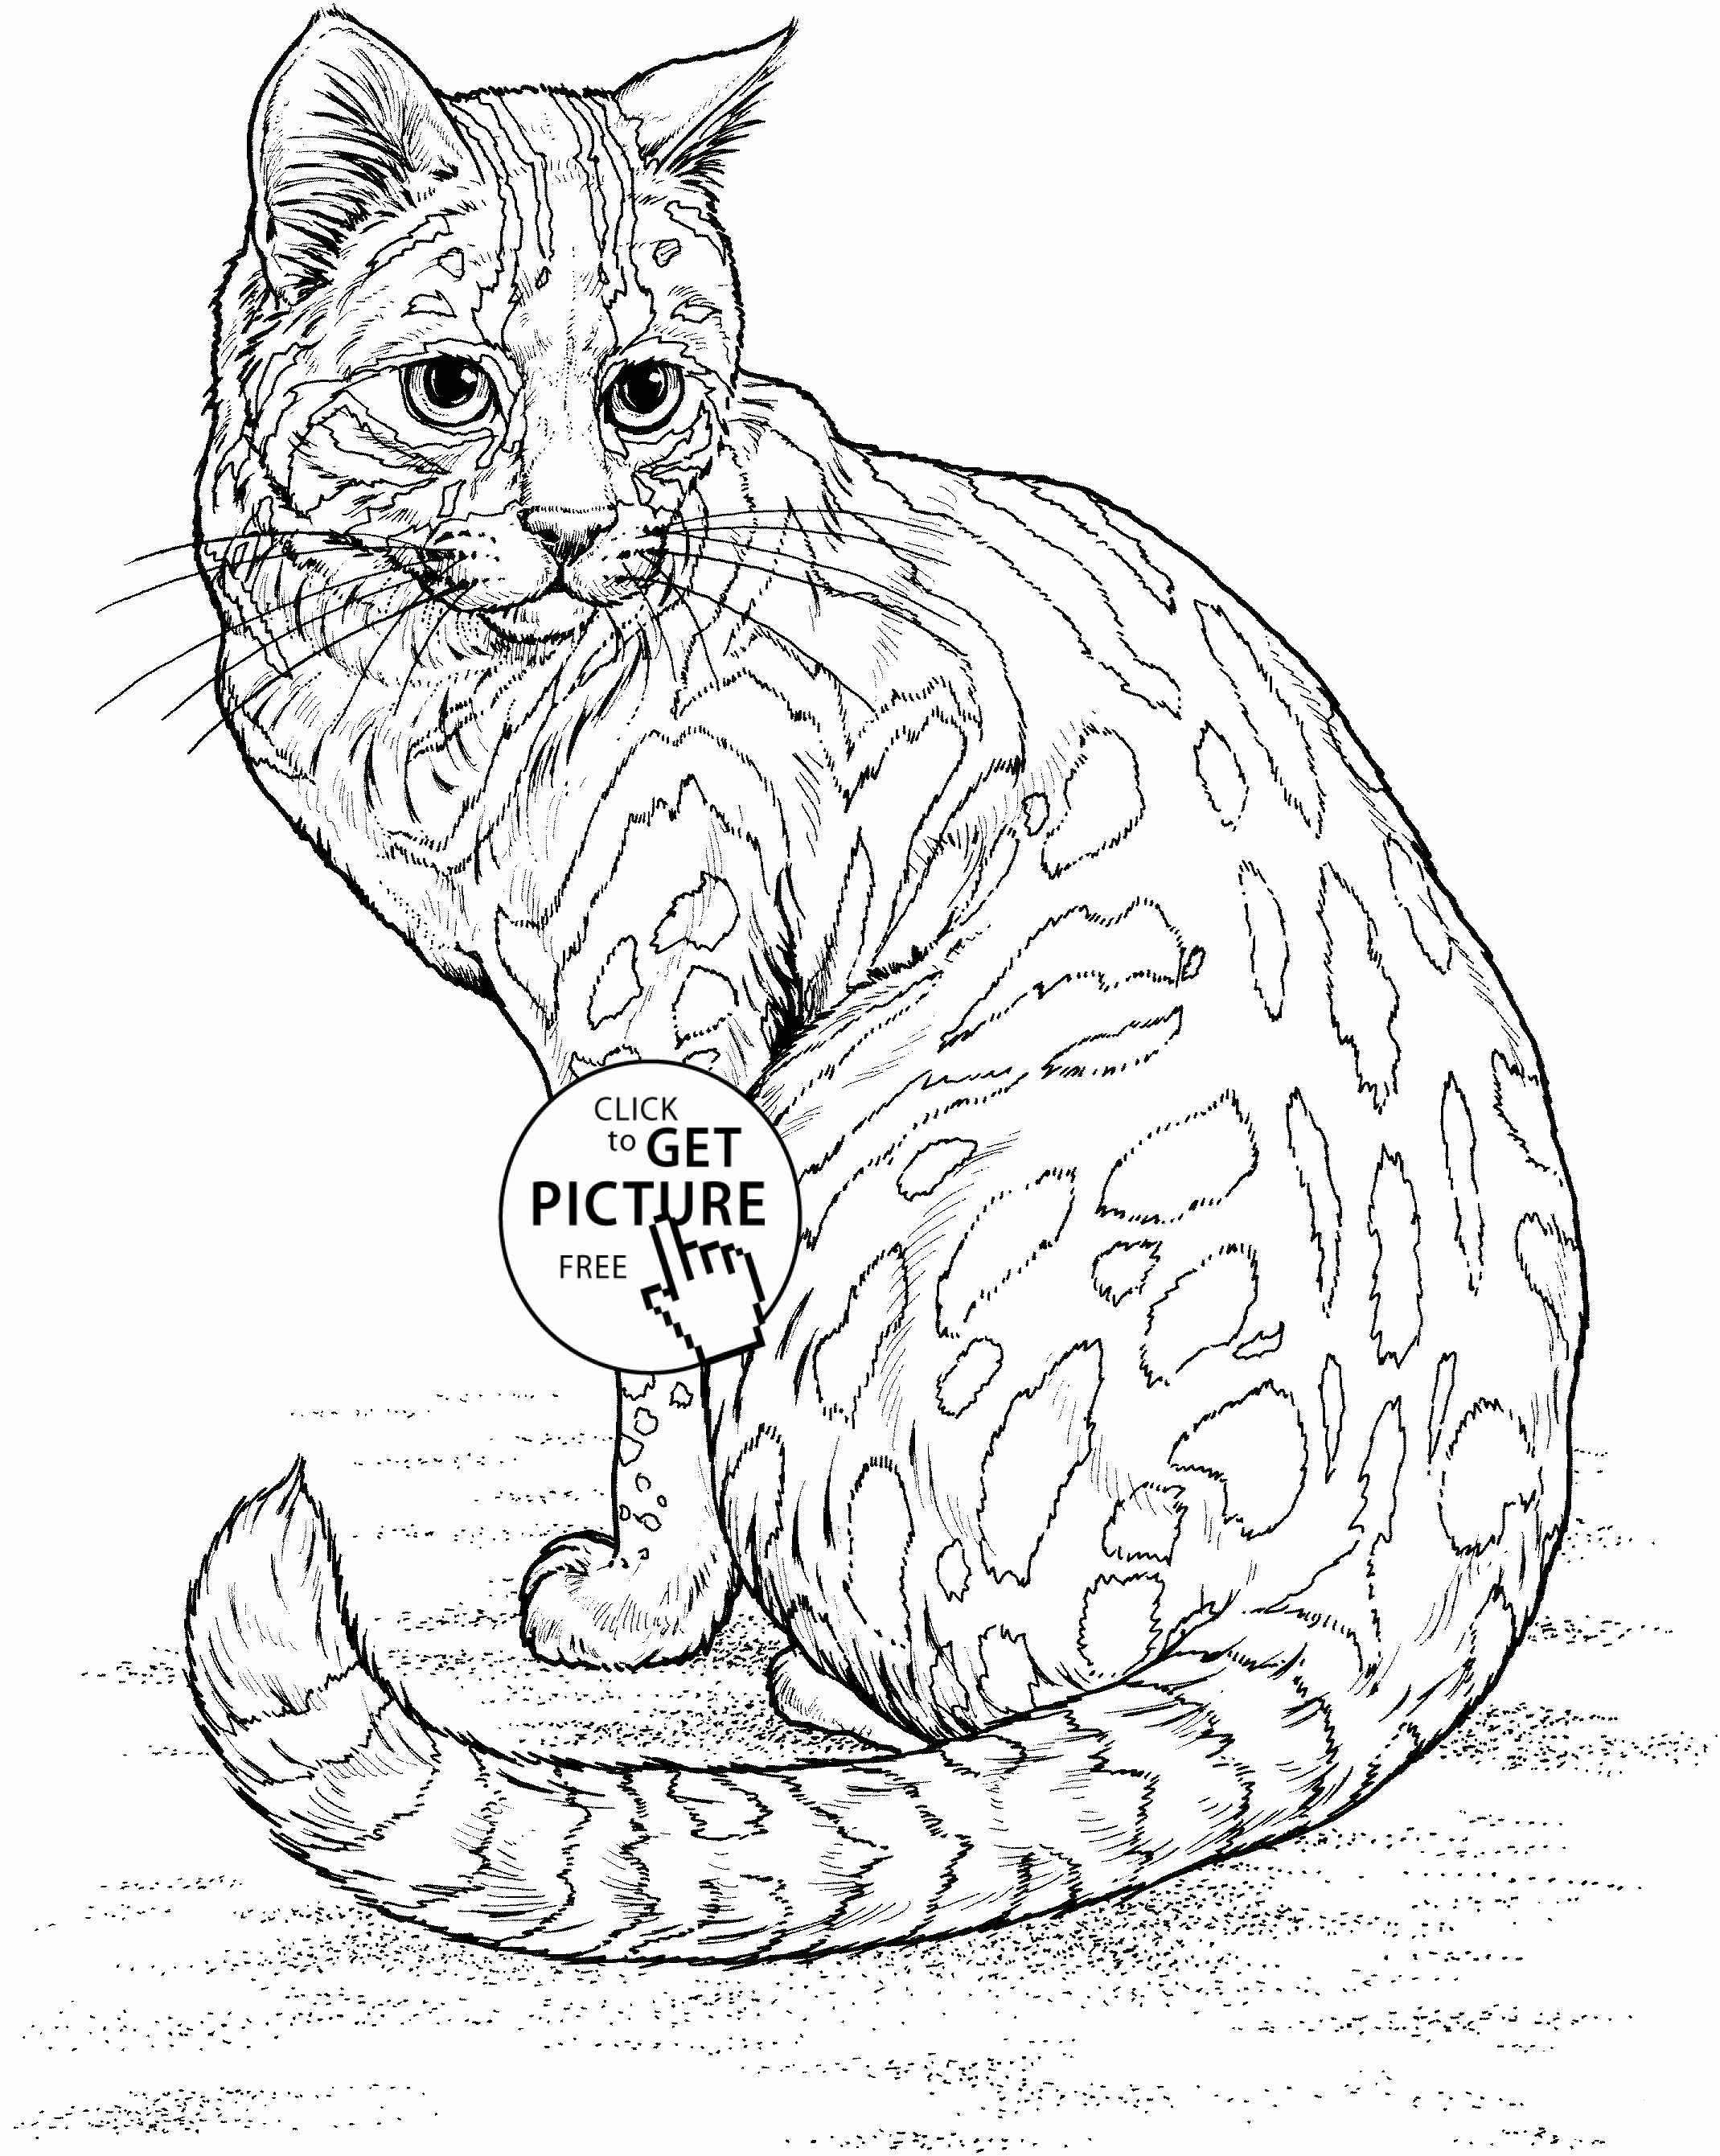 Animal Pictures to Color Fresh Realistic Cat Coloring Page for Kids Animal Coloring